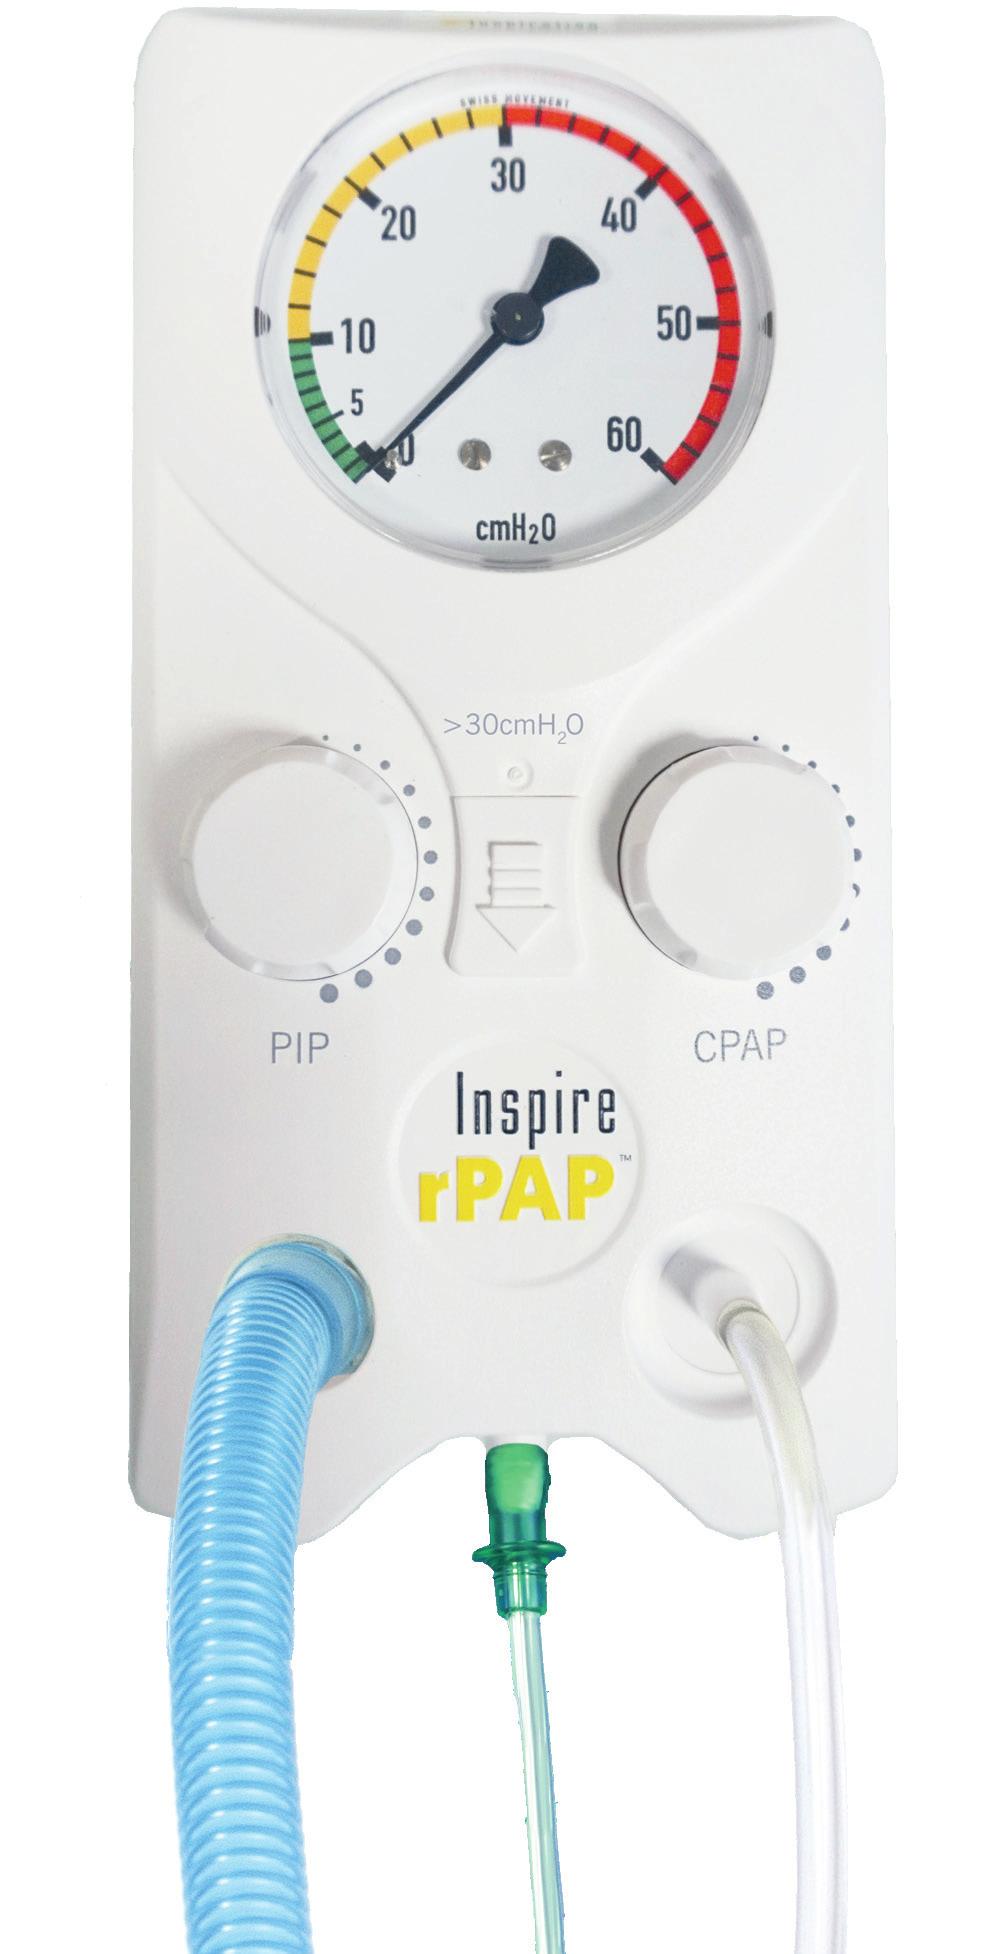 Revolution from the first breath The Inspire rpap is an innovative system comprising an rpap Generator and dedicated rpap Driver that work in conjunction to create an effective, gentle approach to